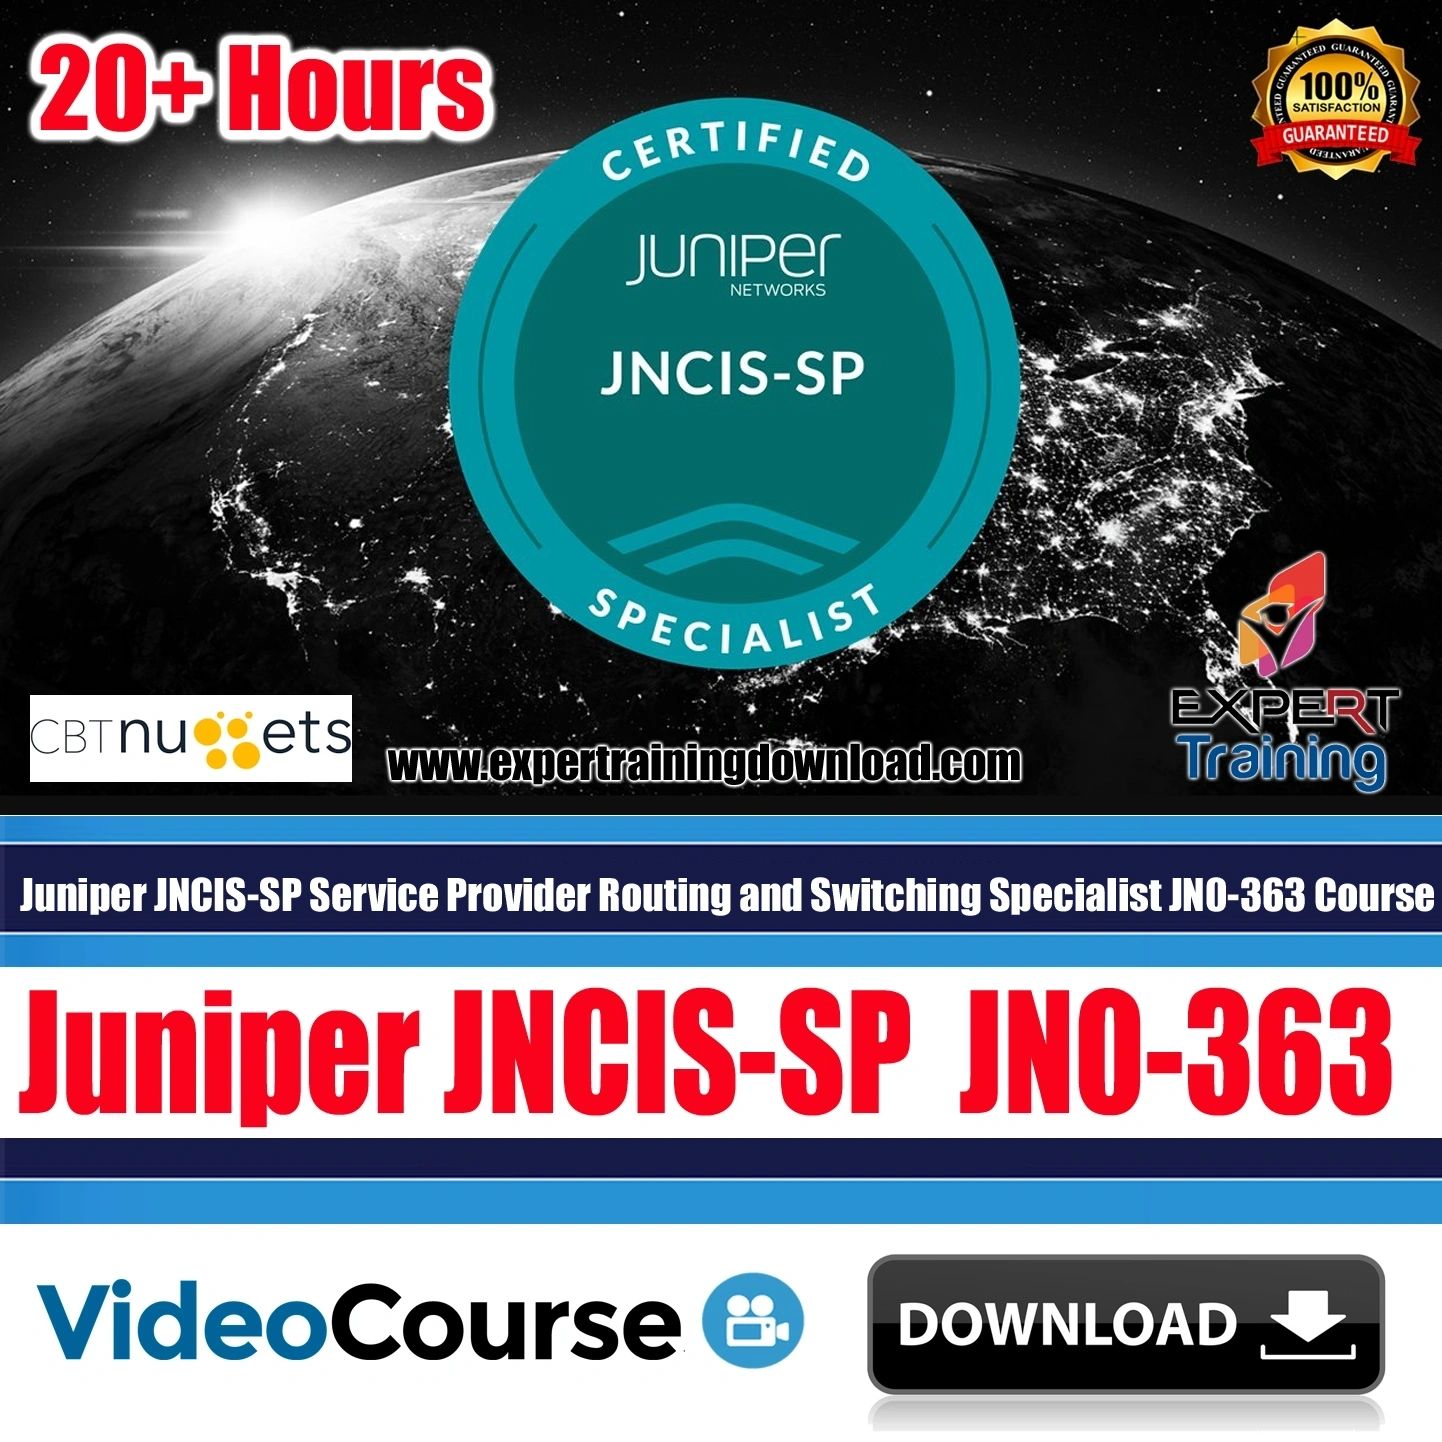 Juniper JNCIS-SP Service Provider Routing and Switching Specialist JN0-363